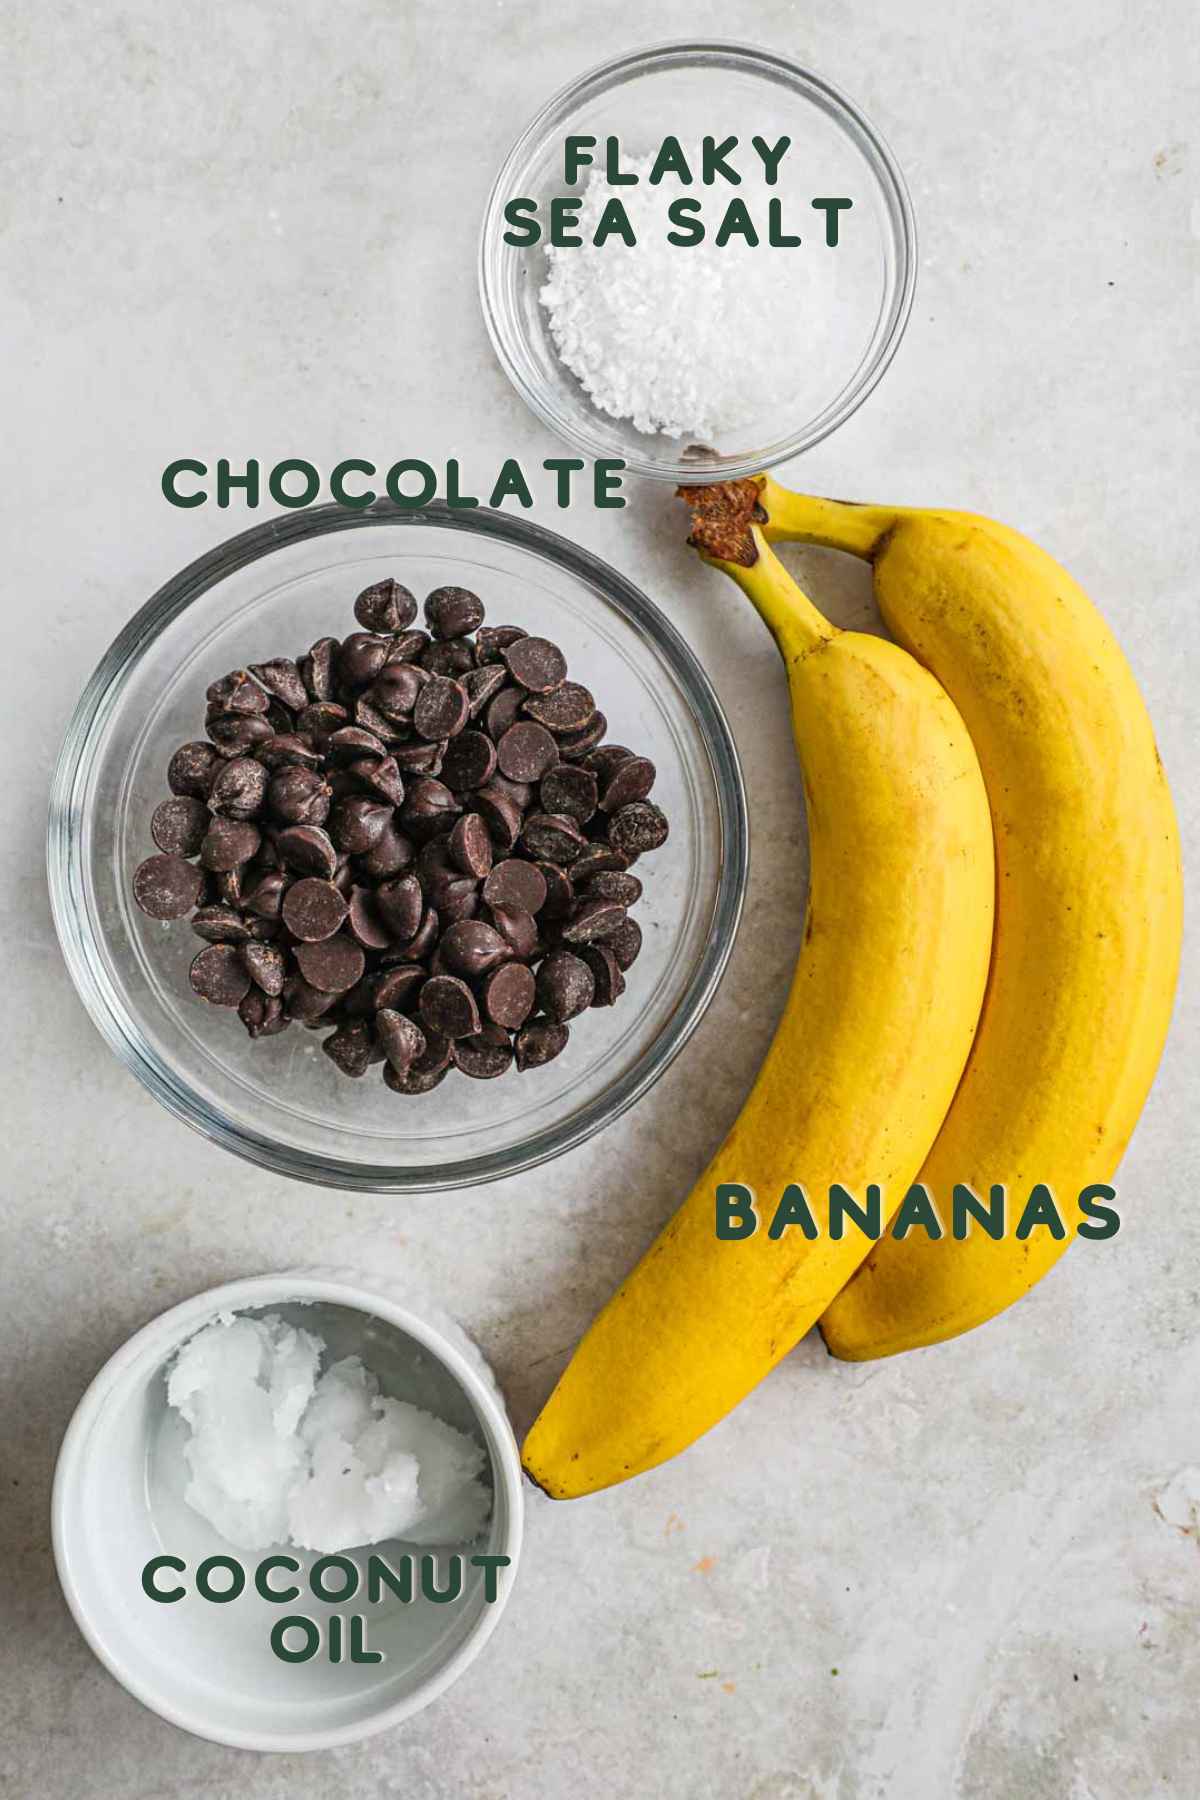 Ingredients to make chocolate-covered bananas, including chocolate, sliced bananas, coconut oil (optional), and flaky sea salt.